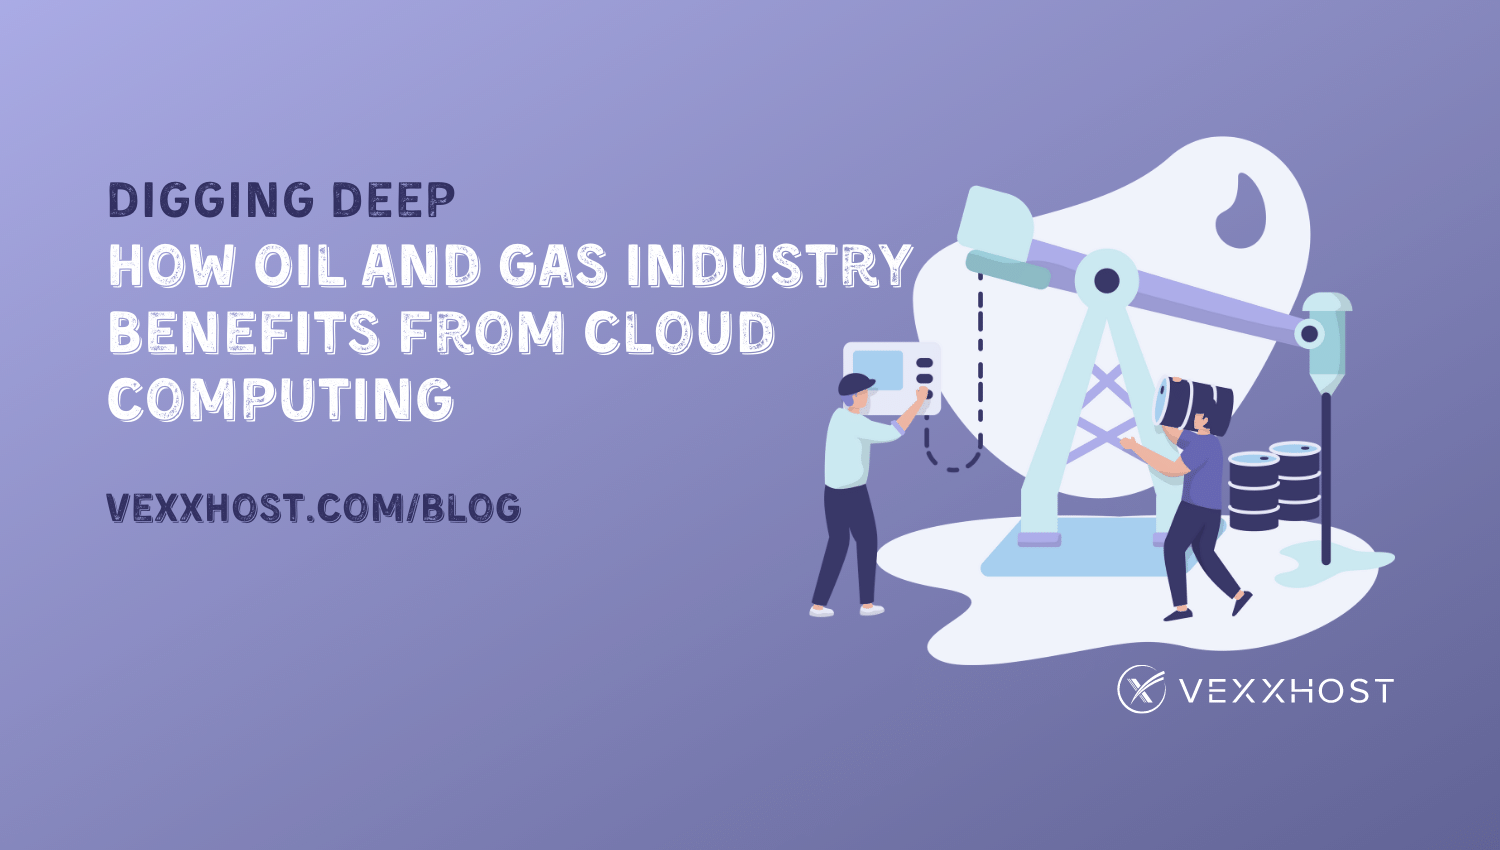 Digging Deep - How Oil and Gas Industry Benefits from Cloud Computing